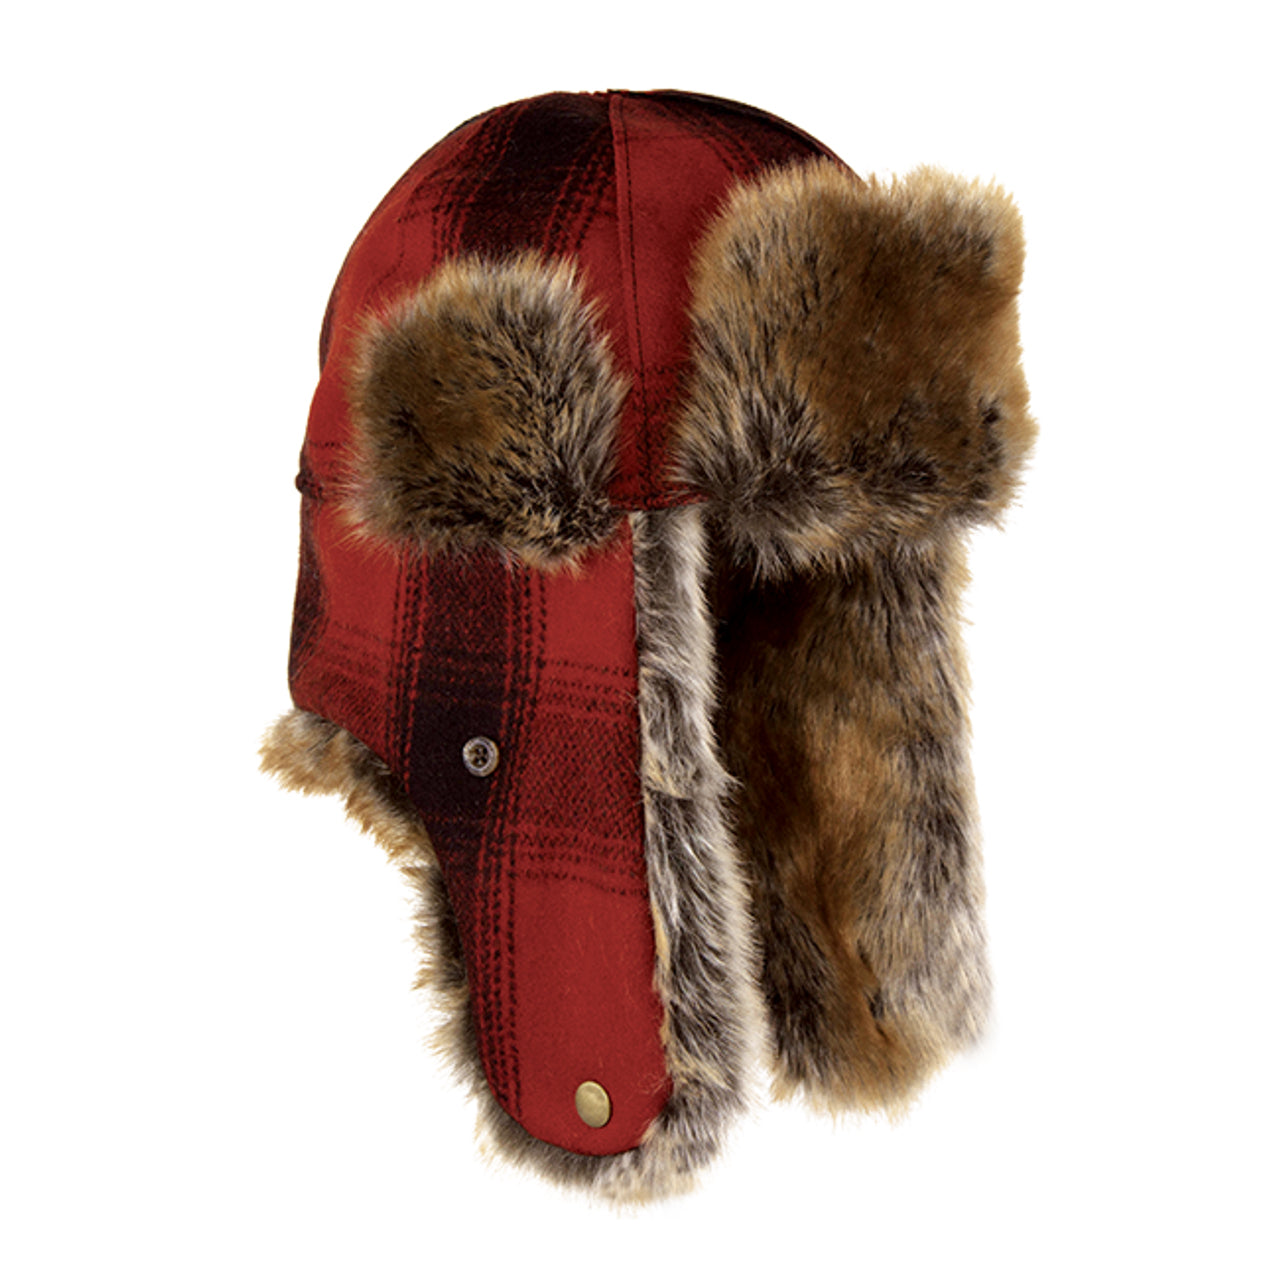 Stormy Kromer The Northwoods Trapper Hat in Red/Black Plaid